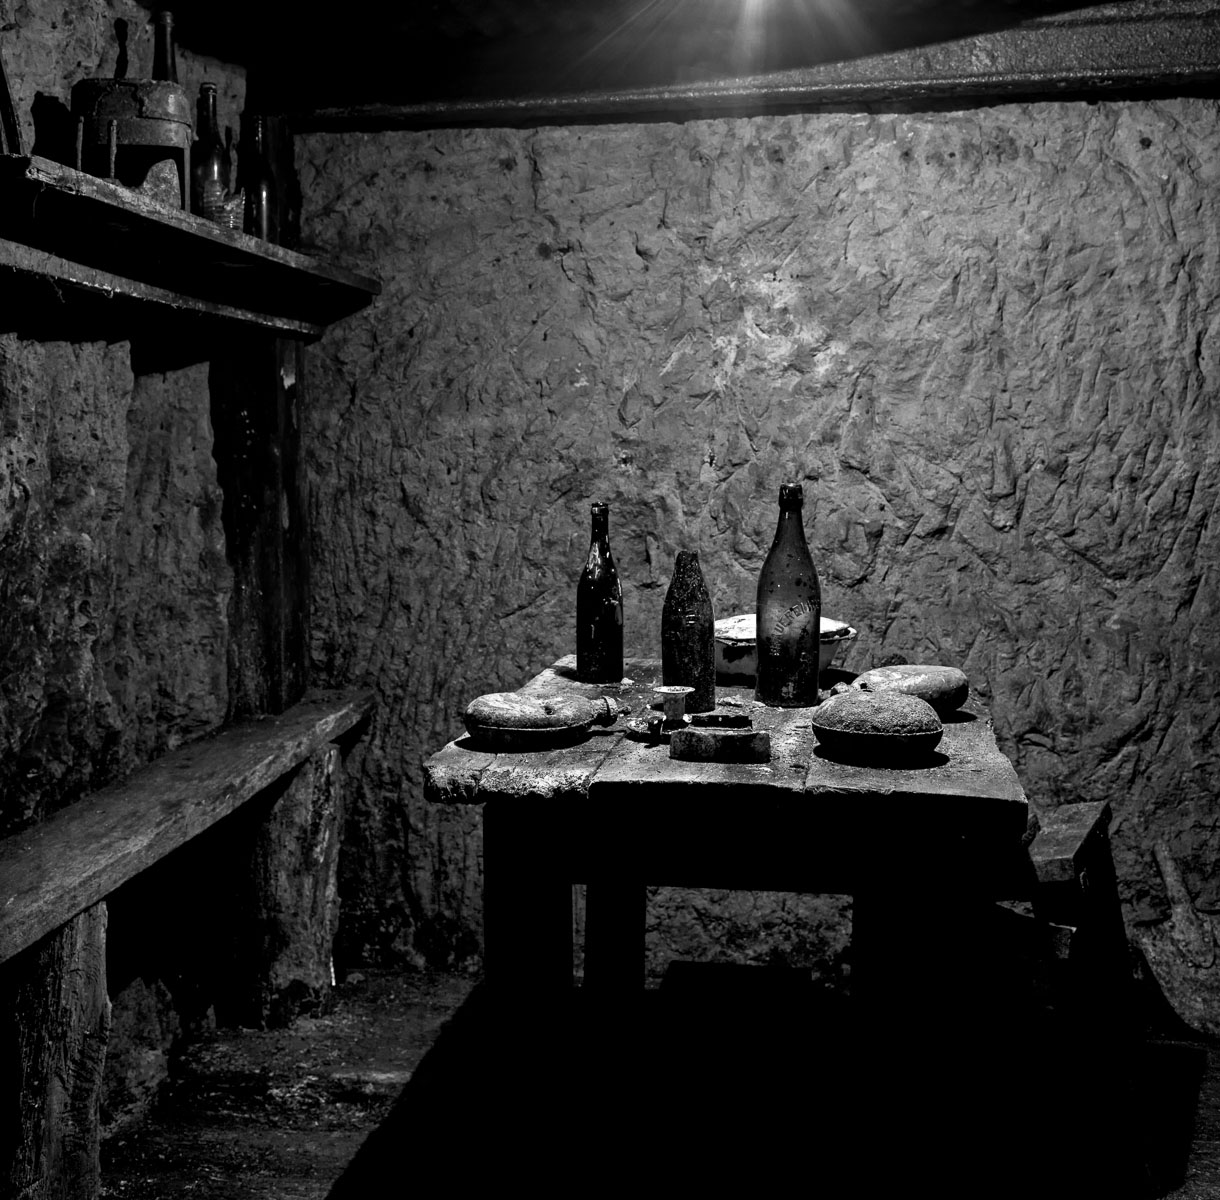 French soldiers' dining area underground with wine bottles, canteens and a serving dish. Photographed 6 December 2011. Vauquois, France. Terms of Use: These photos are for one-time use before January 1, 2015, limited to professional media outlets and blogs, in connection with an accompanying story about Jeffrey Gusky, his work and WWI-related discoveries. Stories appearing during the license period may be archived online by the media outlet or blog who published the story. This image is a low resolution version of the original. Higher resolution images are available by special arrangement with the artist. This image may not be modified and may not be used commercially except with a commercial license. This image is not available under any Creative Commons license. Copyright (c) 2011, Jeffrey Gusky. All Rights Reserved. Jeffrey Gusky, c/o attorney at P.O. Box 2526, Addison, TX 75001-2526. photos@jeffgusky.com .